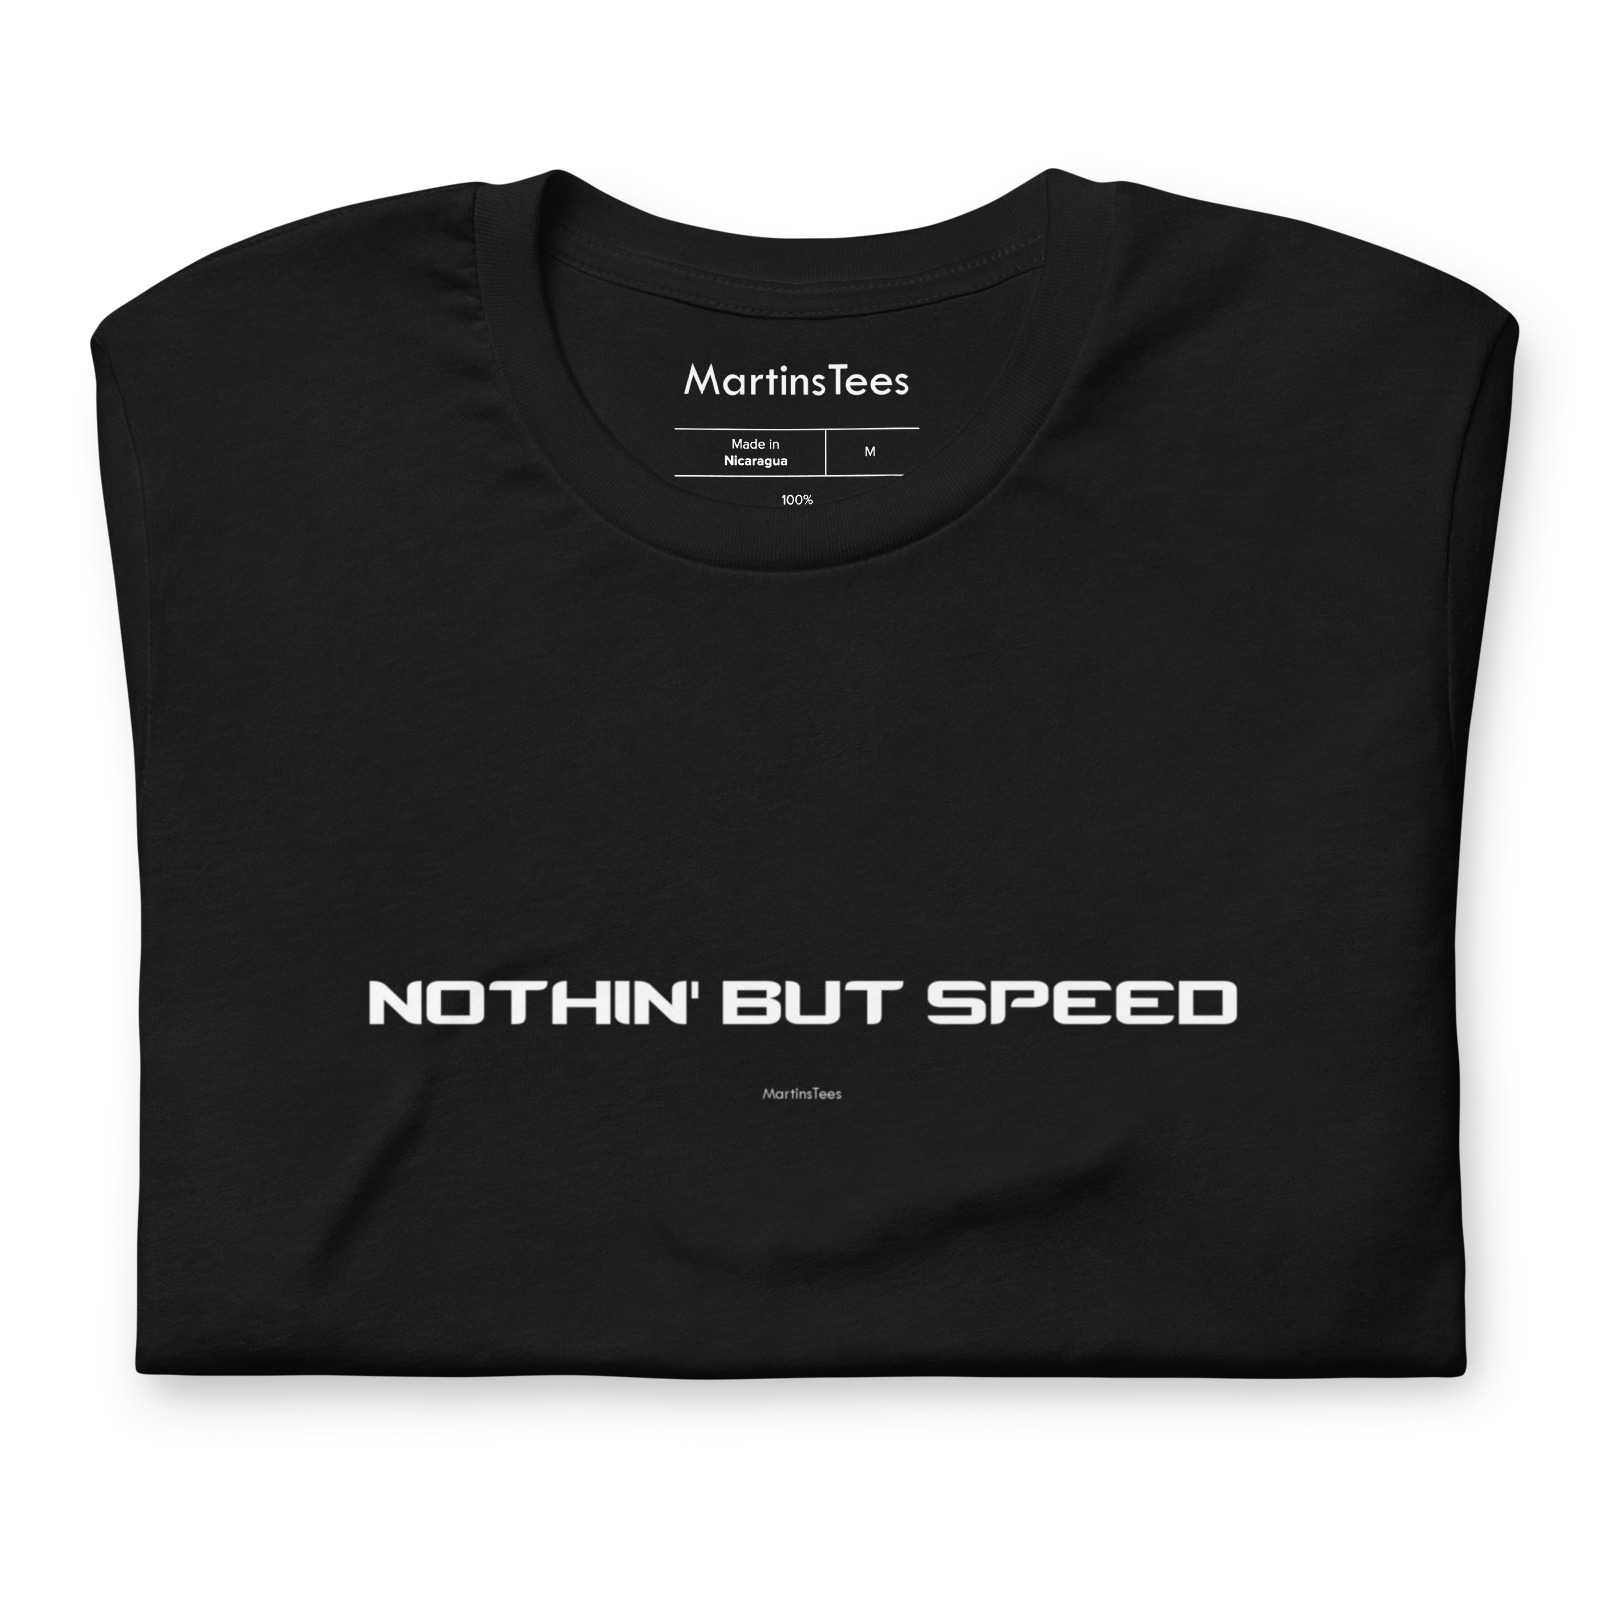 T-shirt: NOTHIN' BUT SPEED